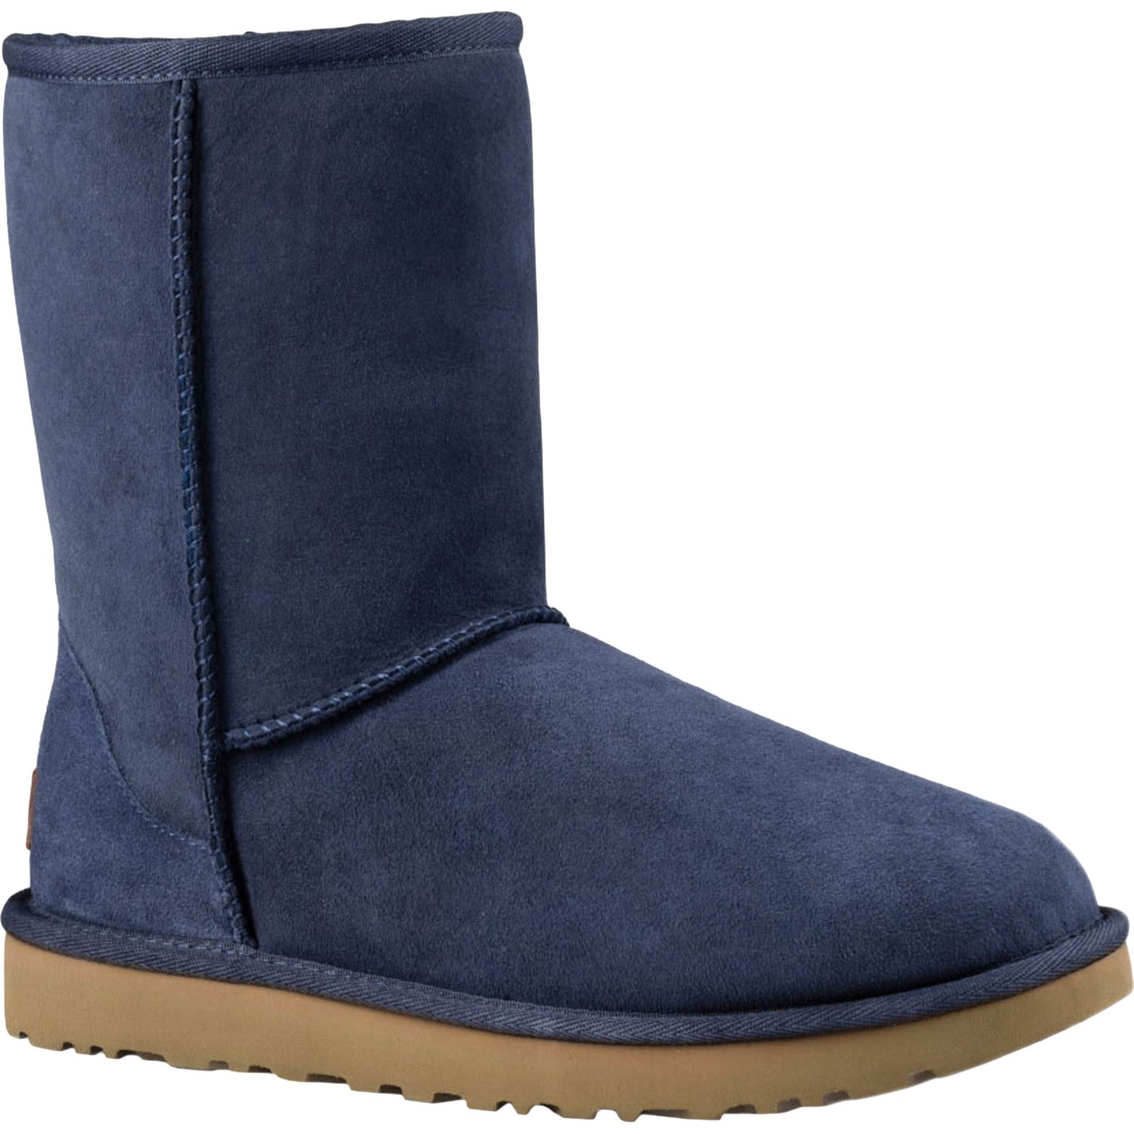 Ugg Women's Classic Short Boots | Booties | Shoes | Shop The Exchange